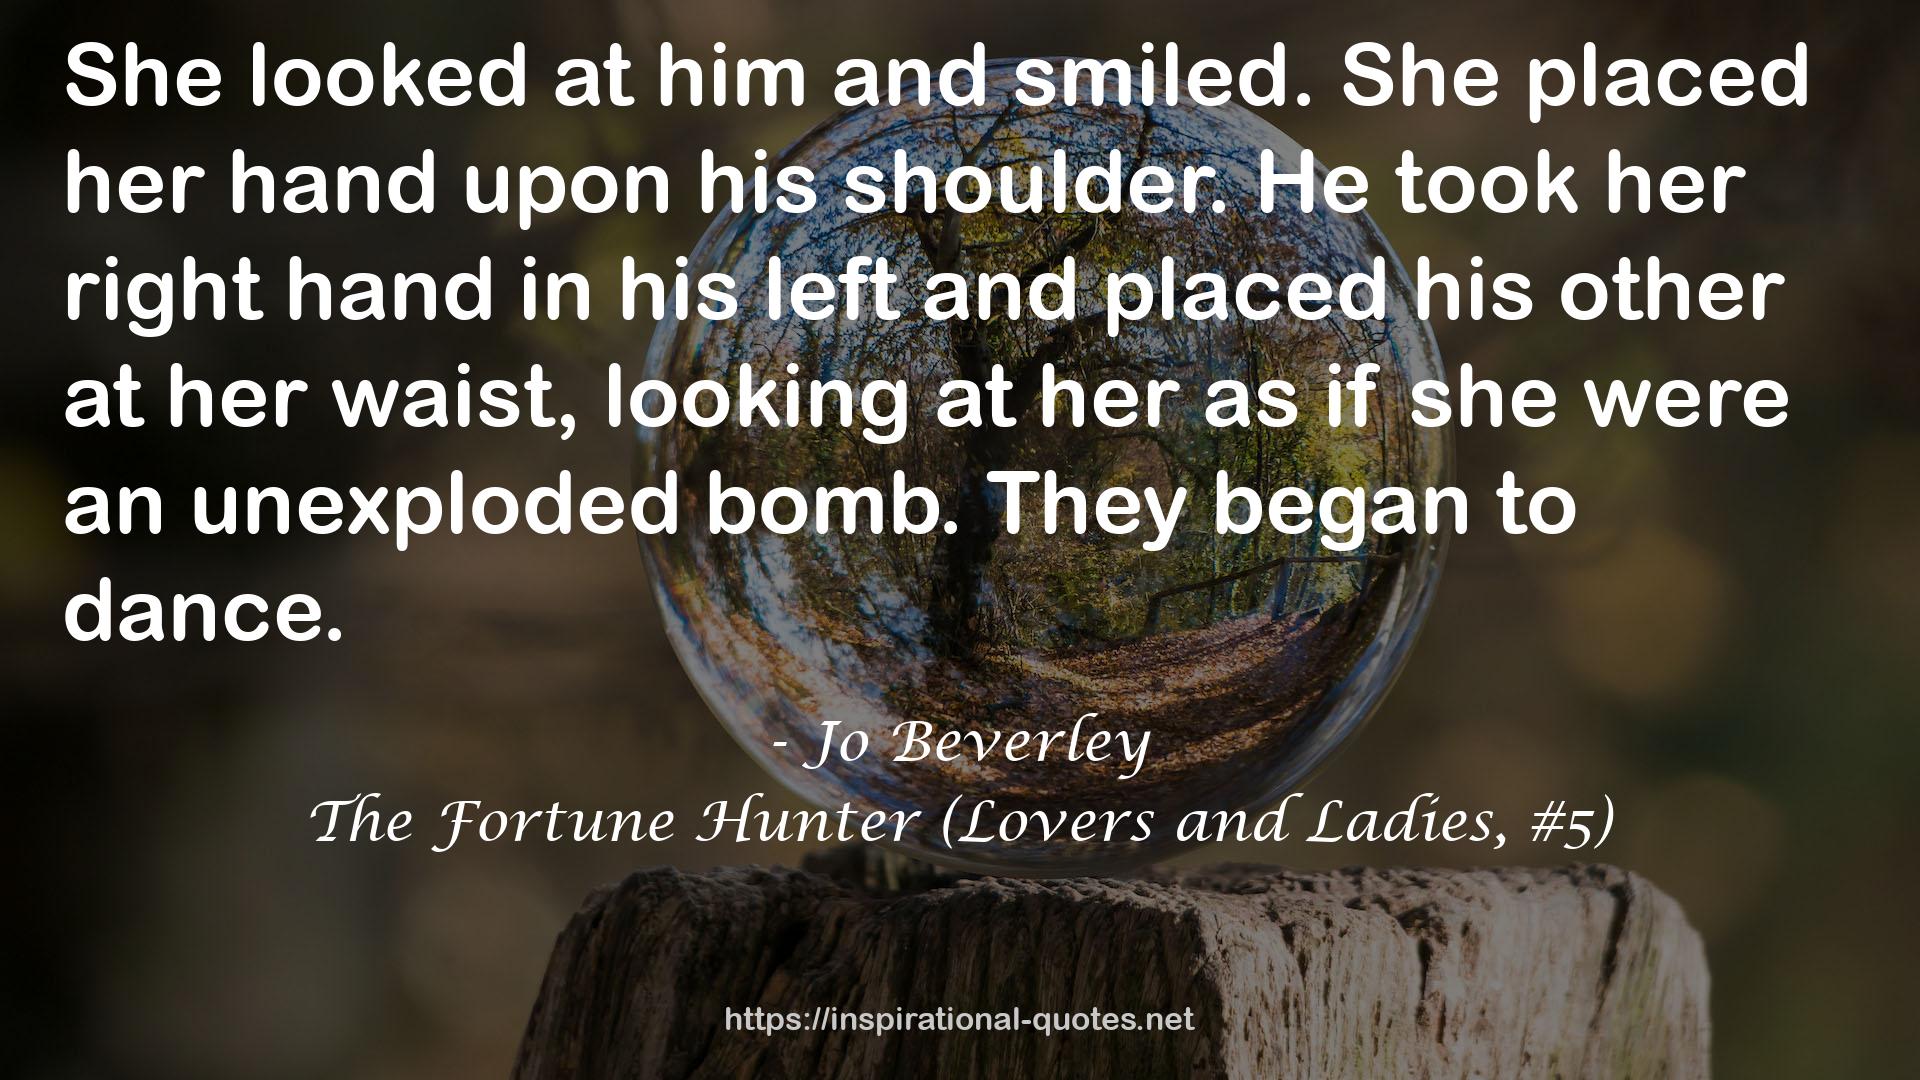 The Fortune Hunter (Lovers and Ladies, #5) QUOTES